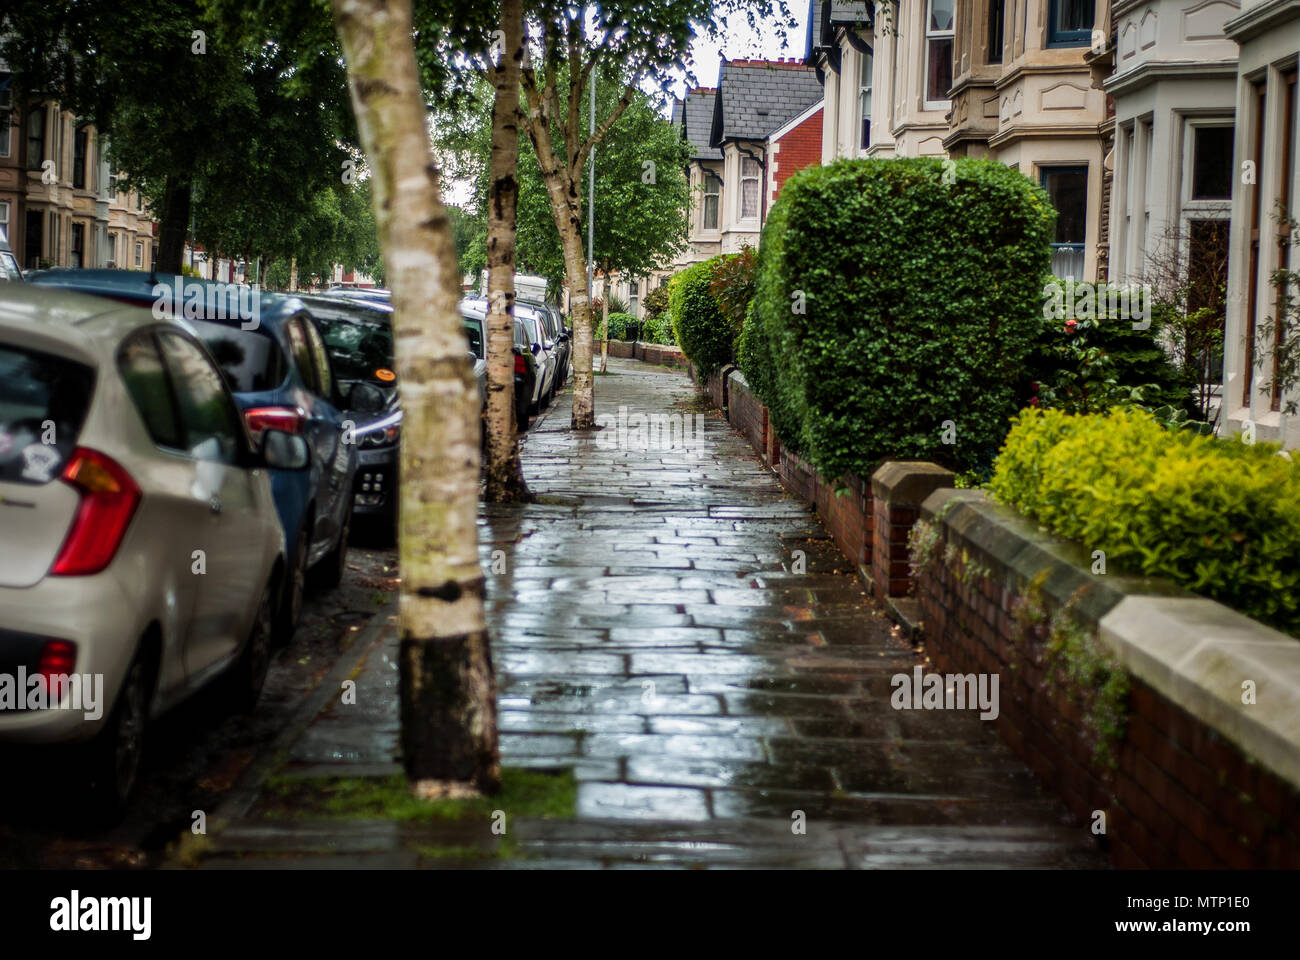 Wet pavement on residential street Stock Photo